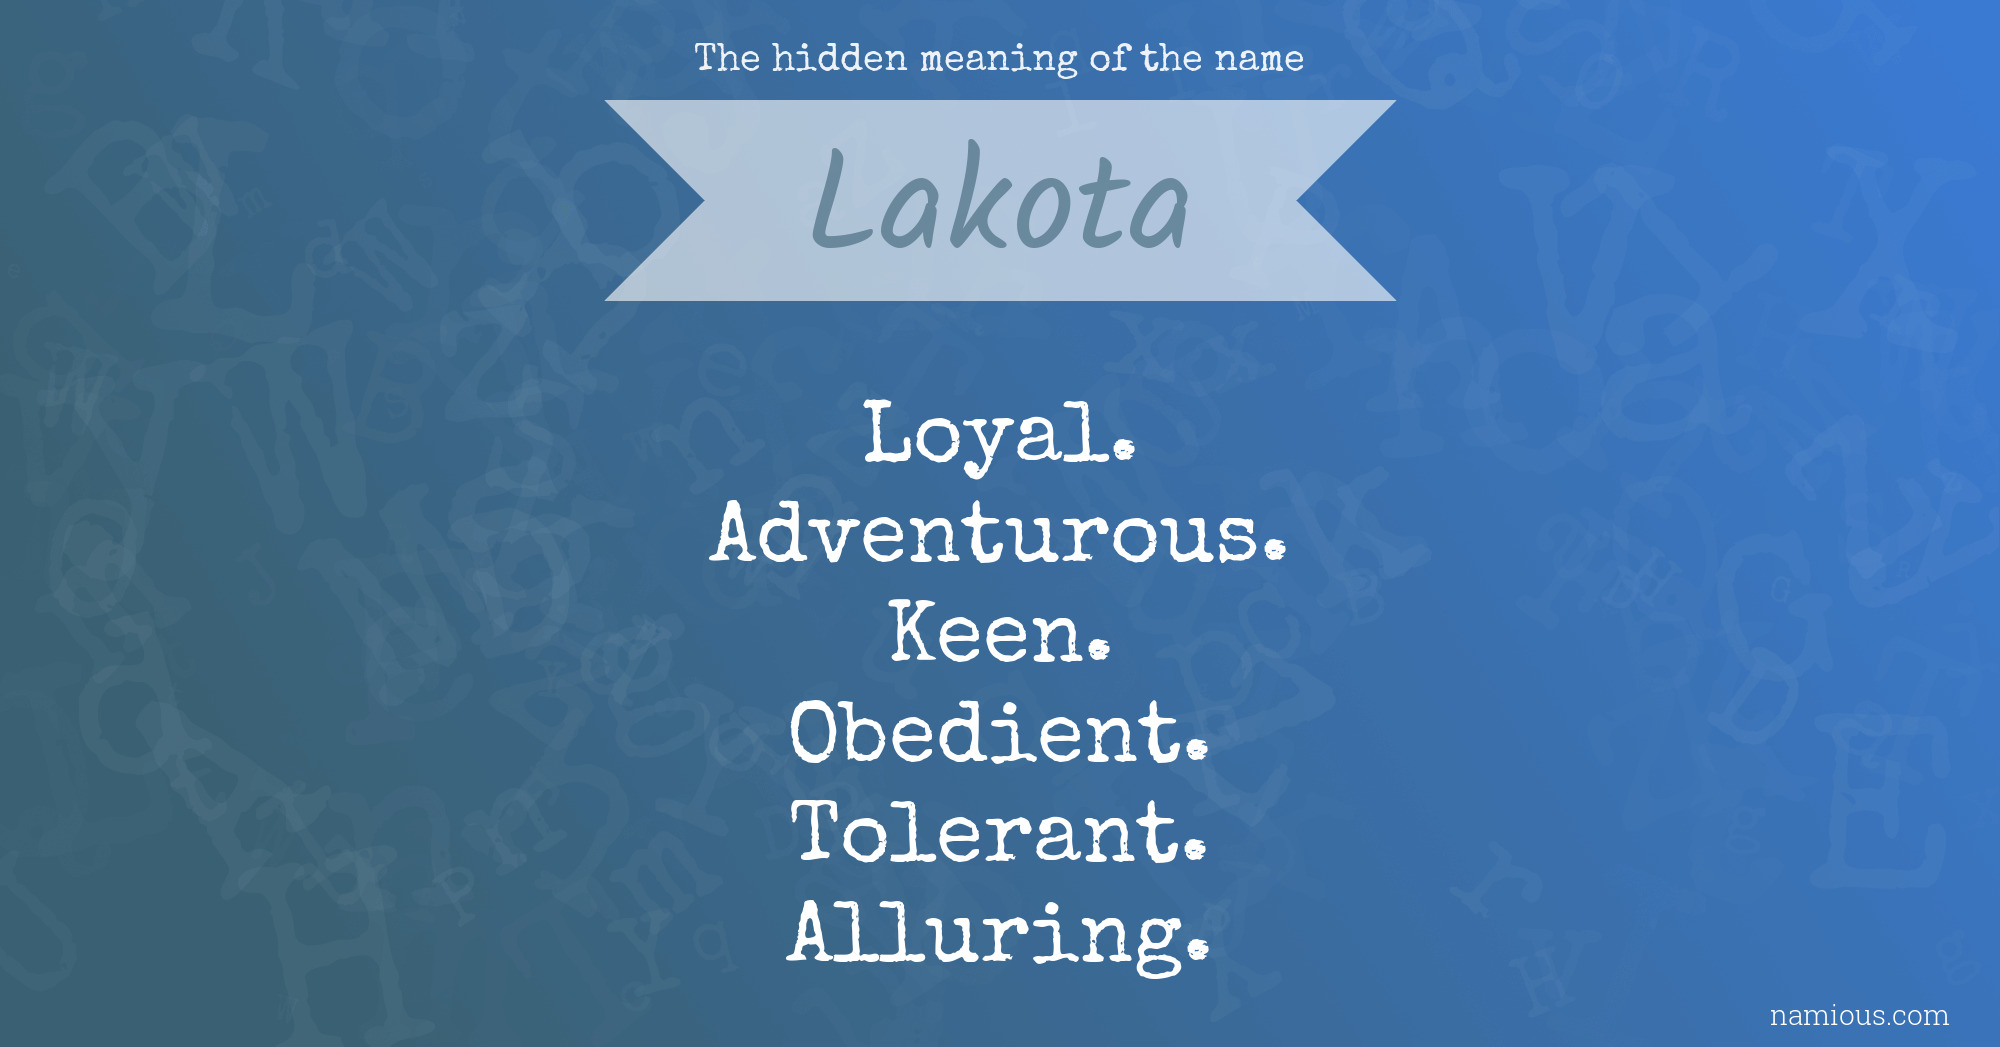 The hidden meaning of the name Lakota